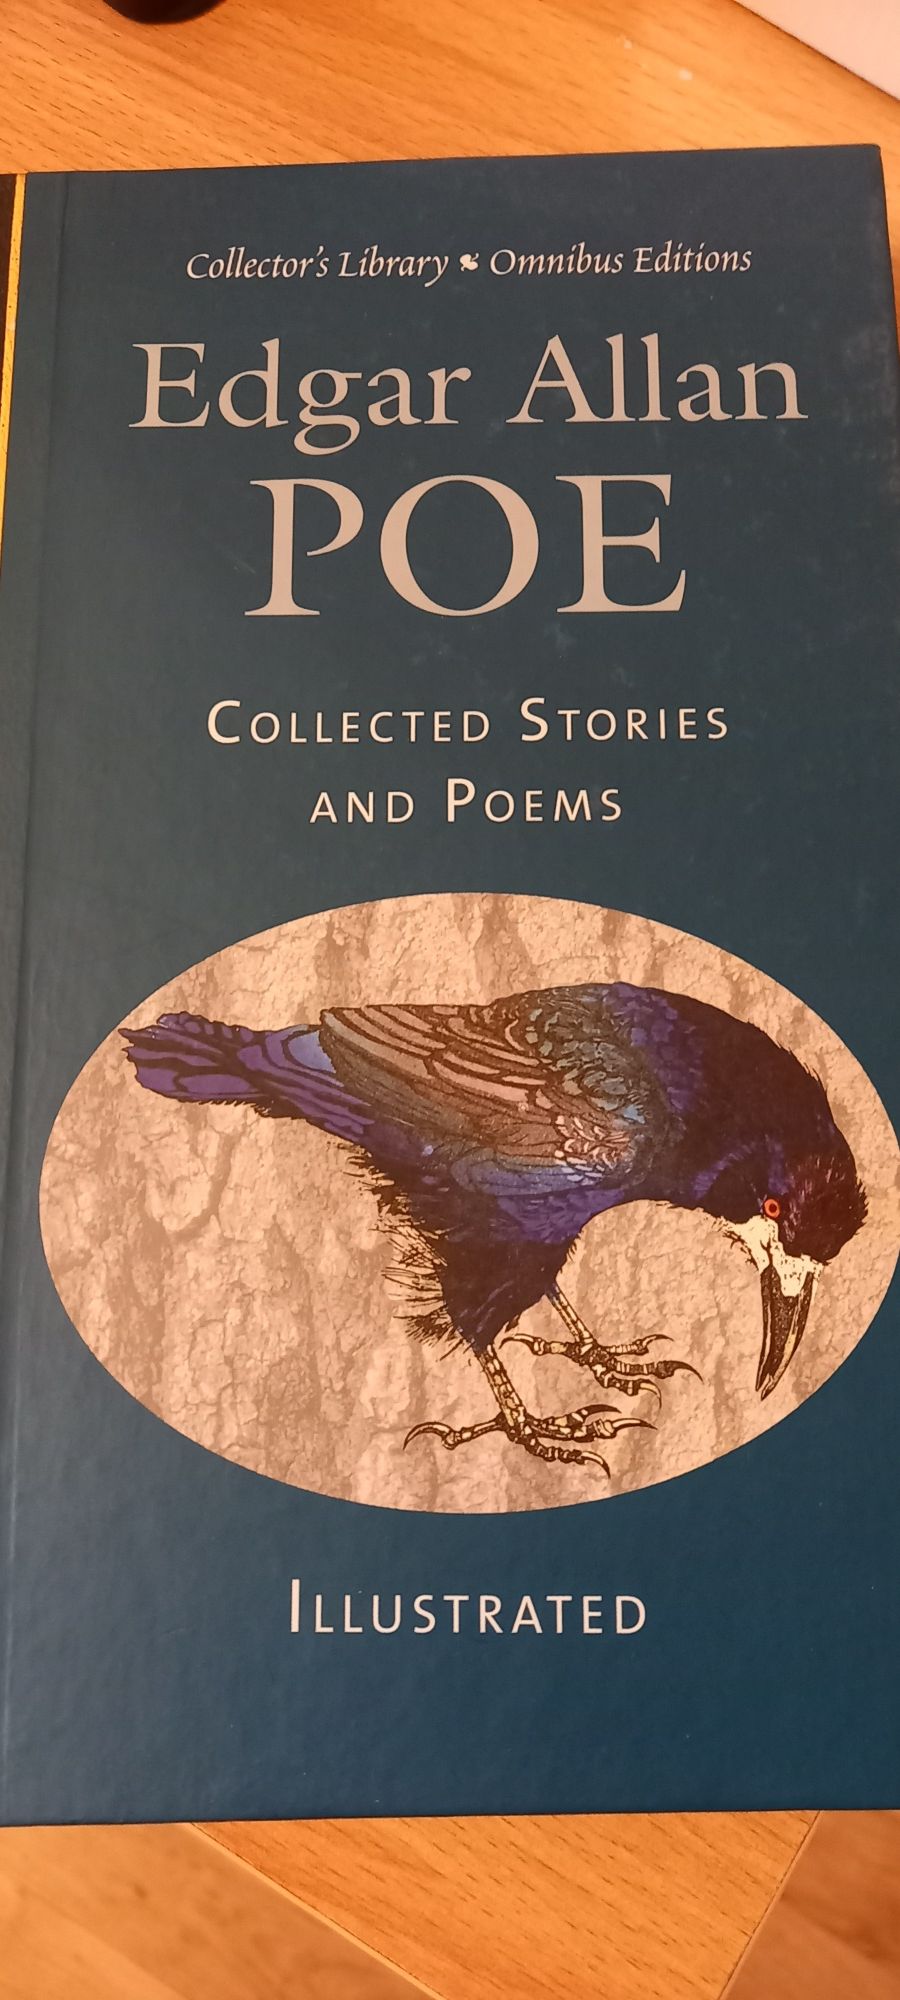 Edgar Allan Poe collected stories and poems